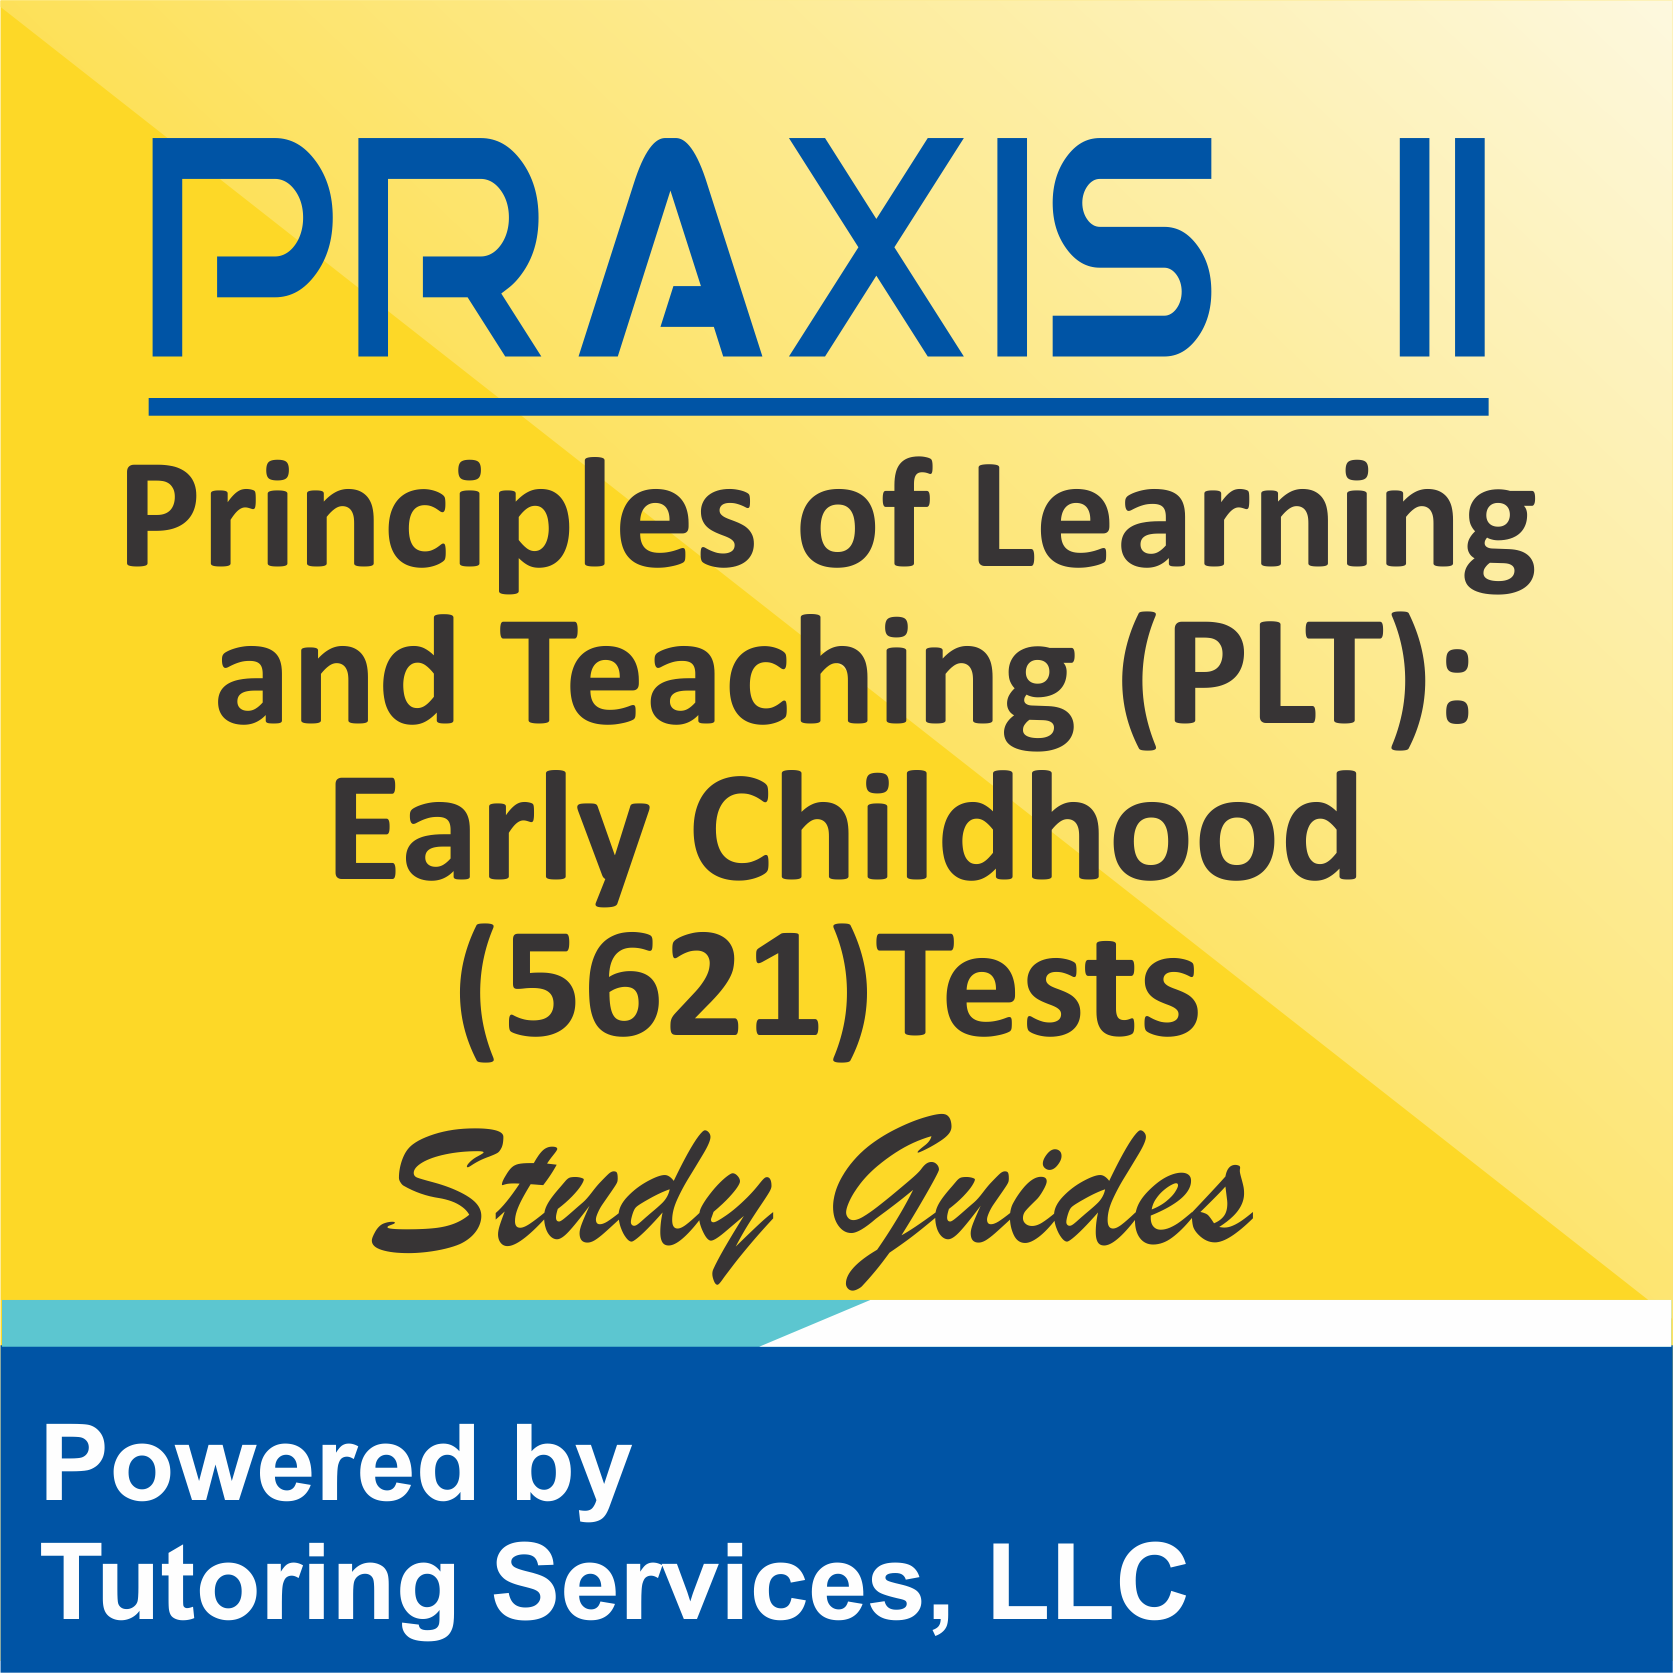 Praxis II Principles of Learning and Teaching: Early Childhood (5621) Test Information